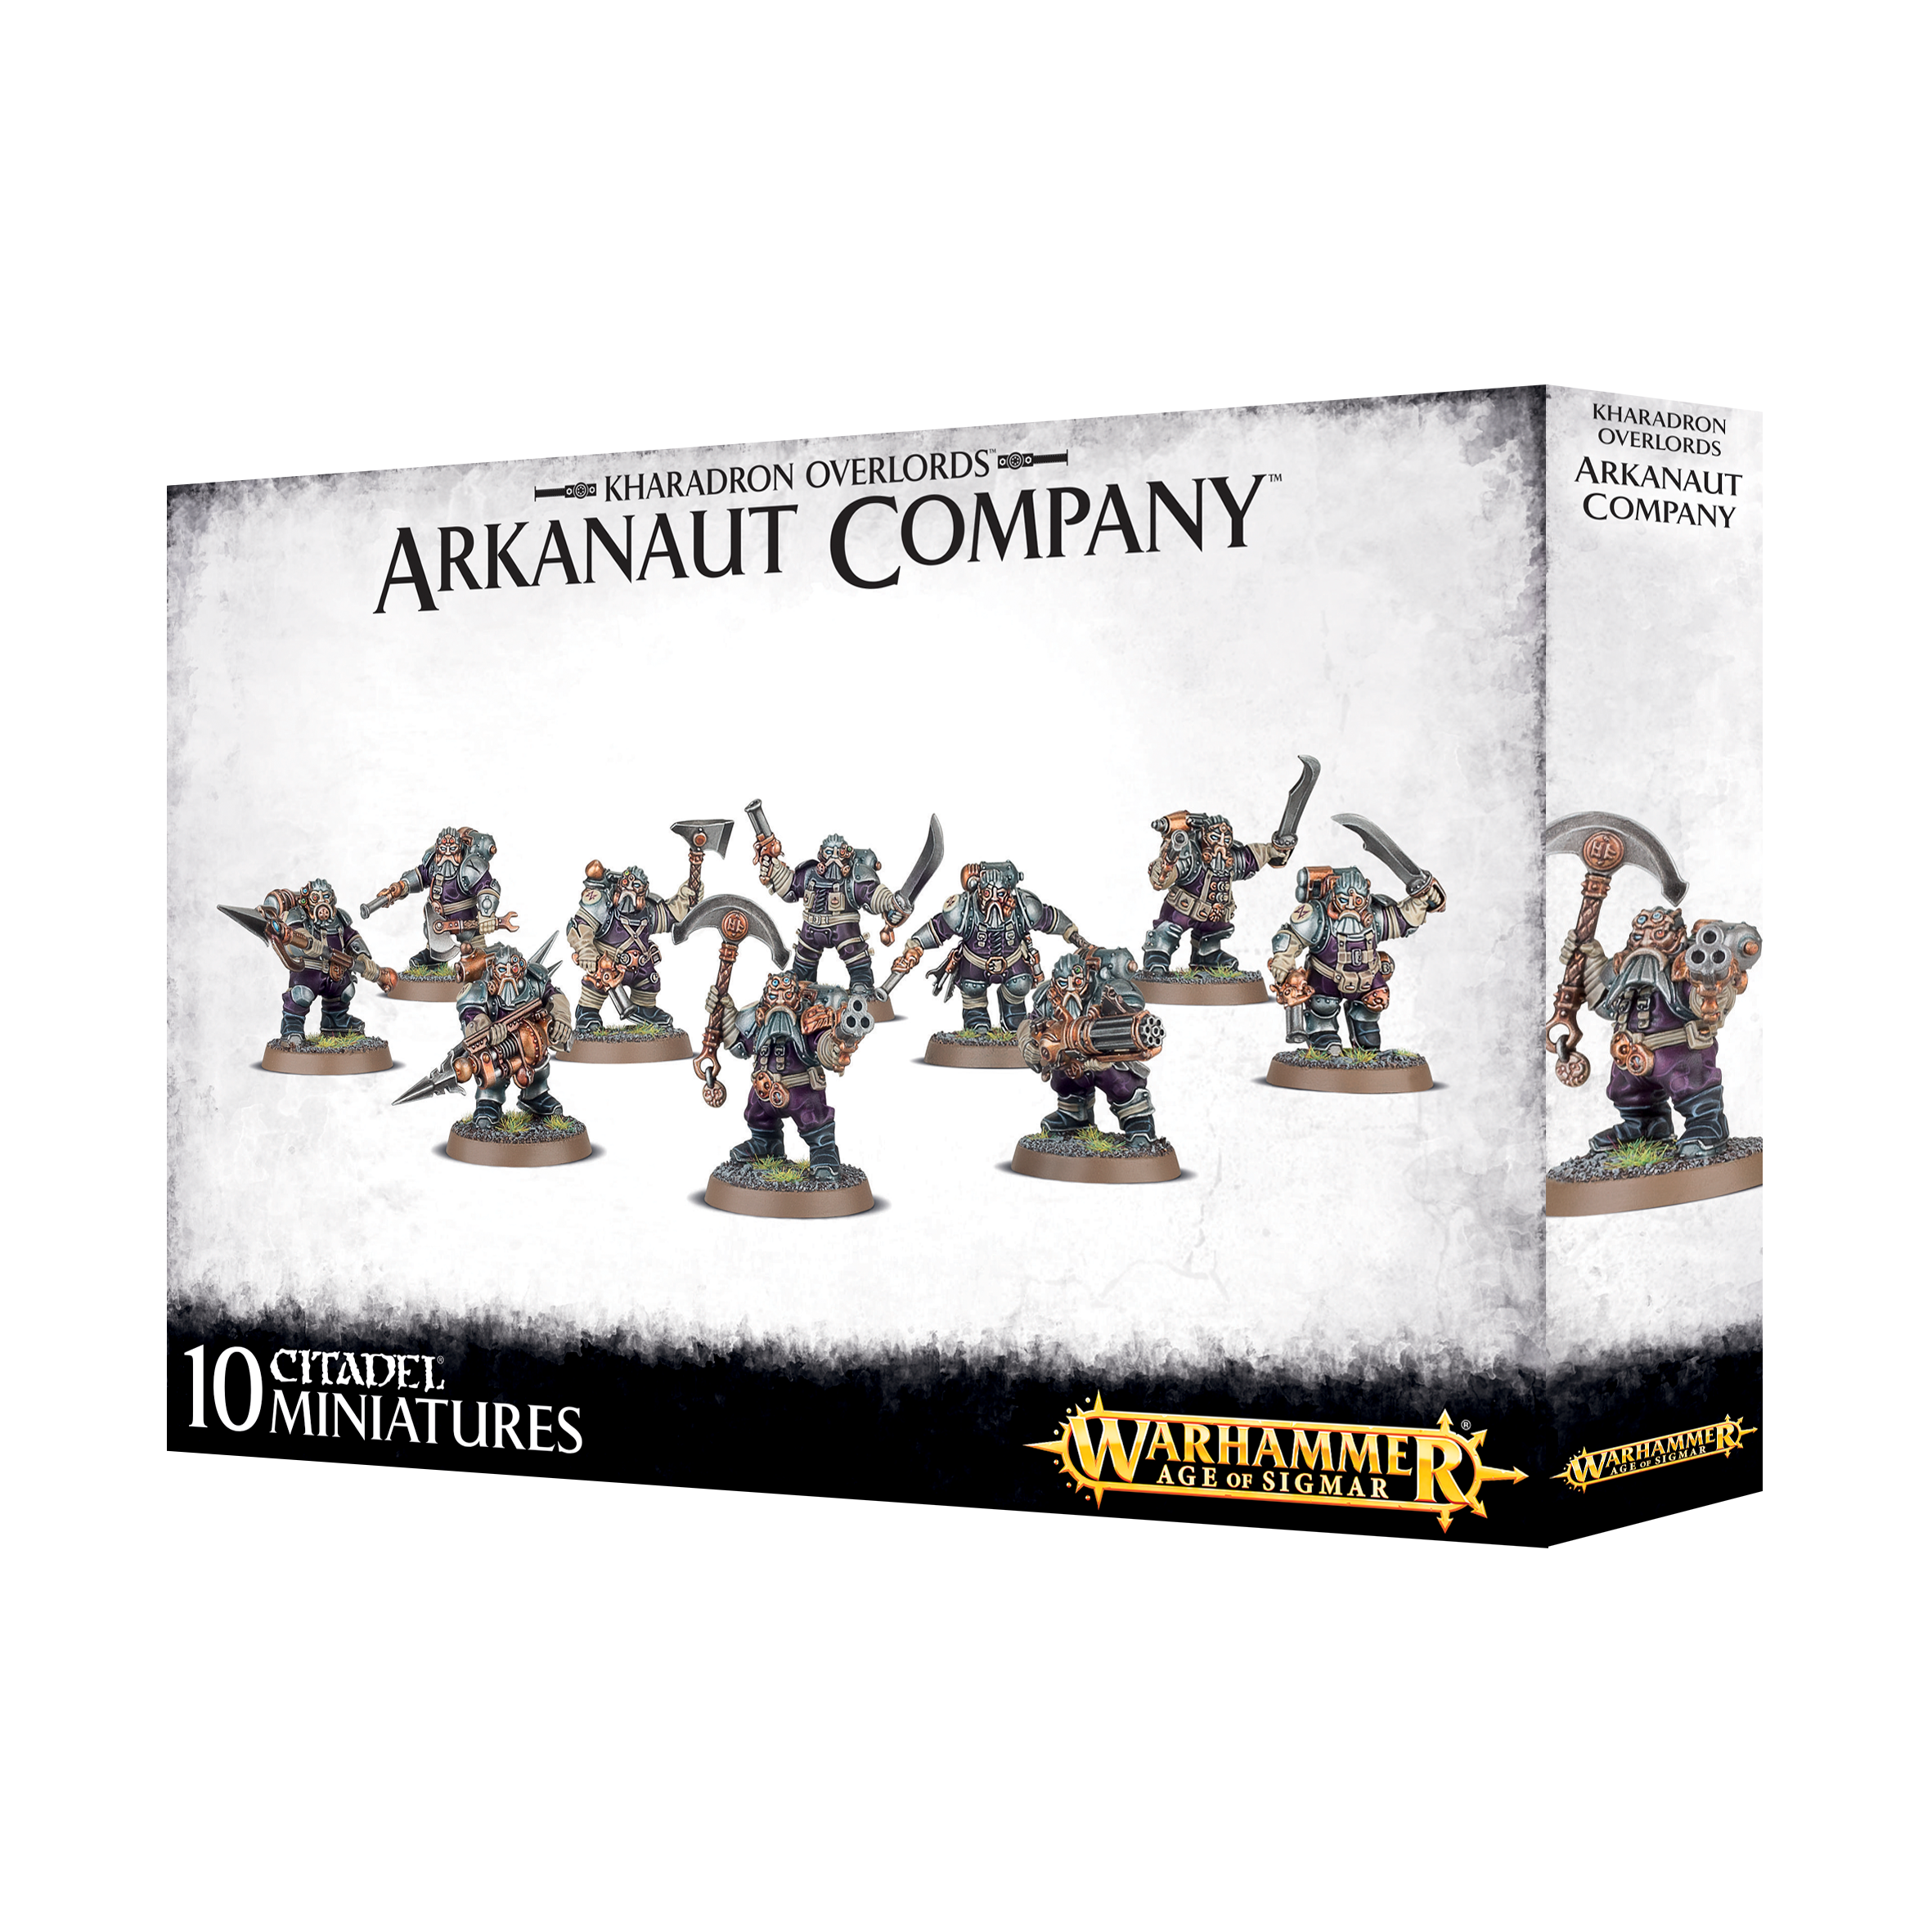 Warhammer Age of Sigmar Kharadron Overlords Arkanaut Company - Bards & Cards